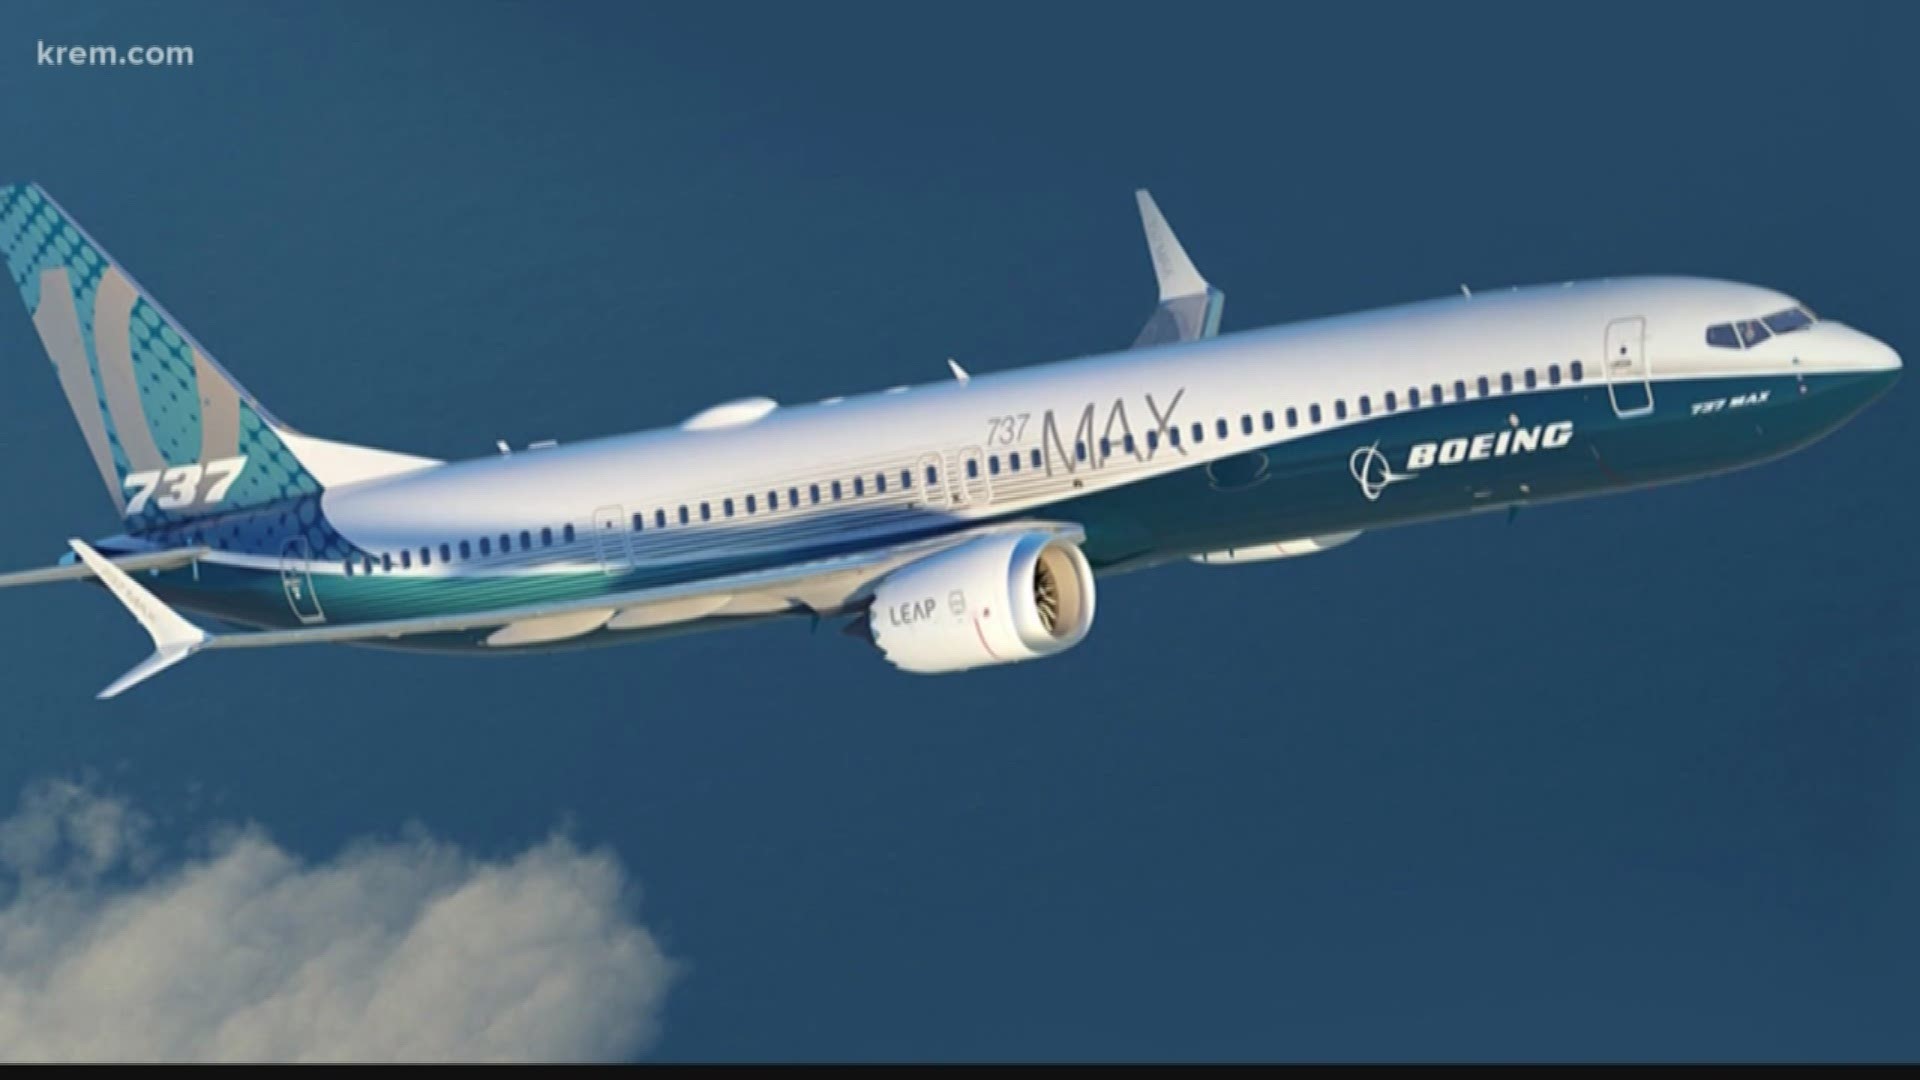 KREM Reporter Amanda Roley explored how you can find out if the flight you booked uses the Boeing 737 MAX 8.